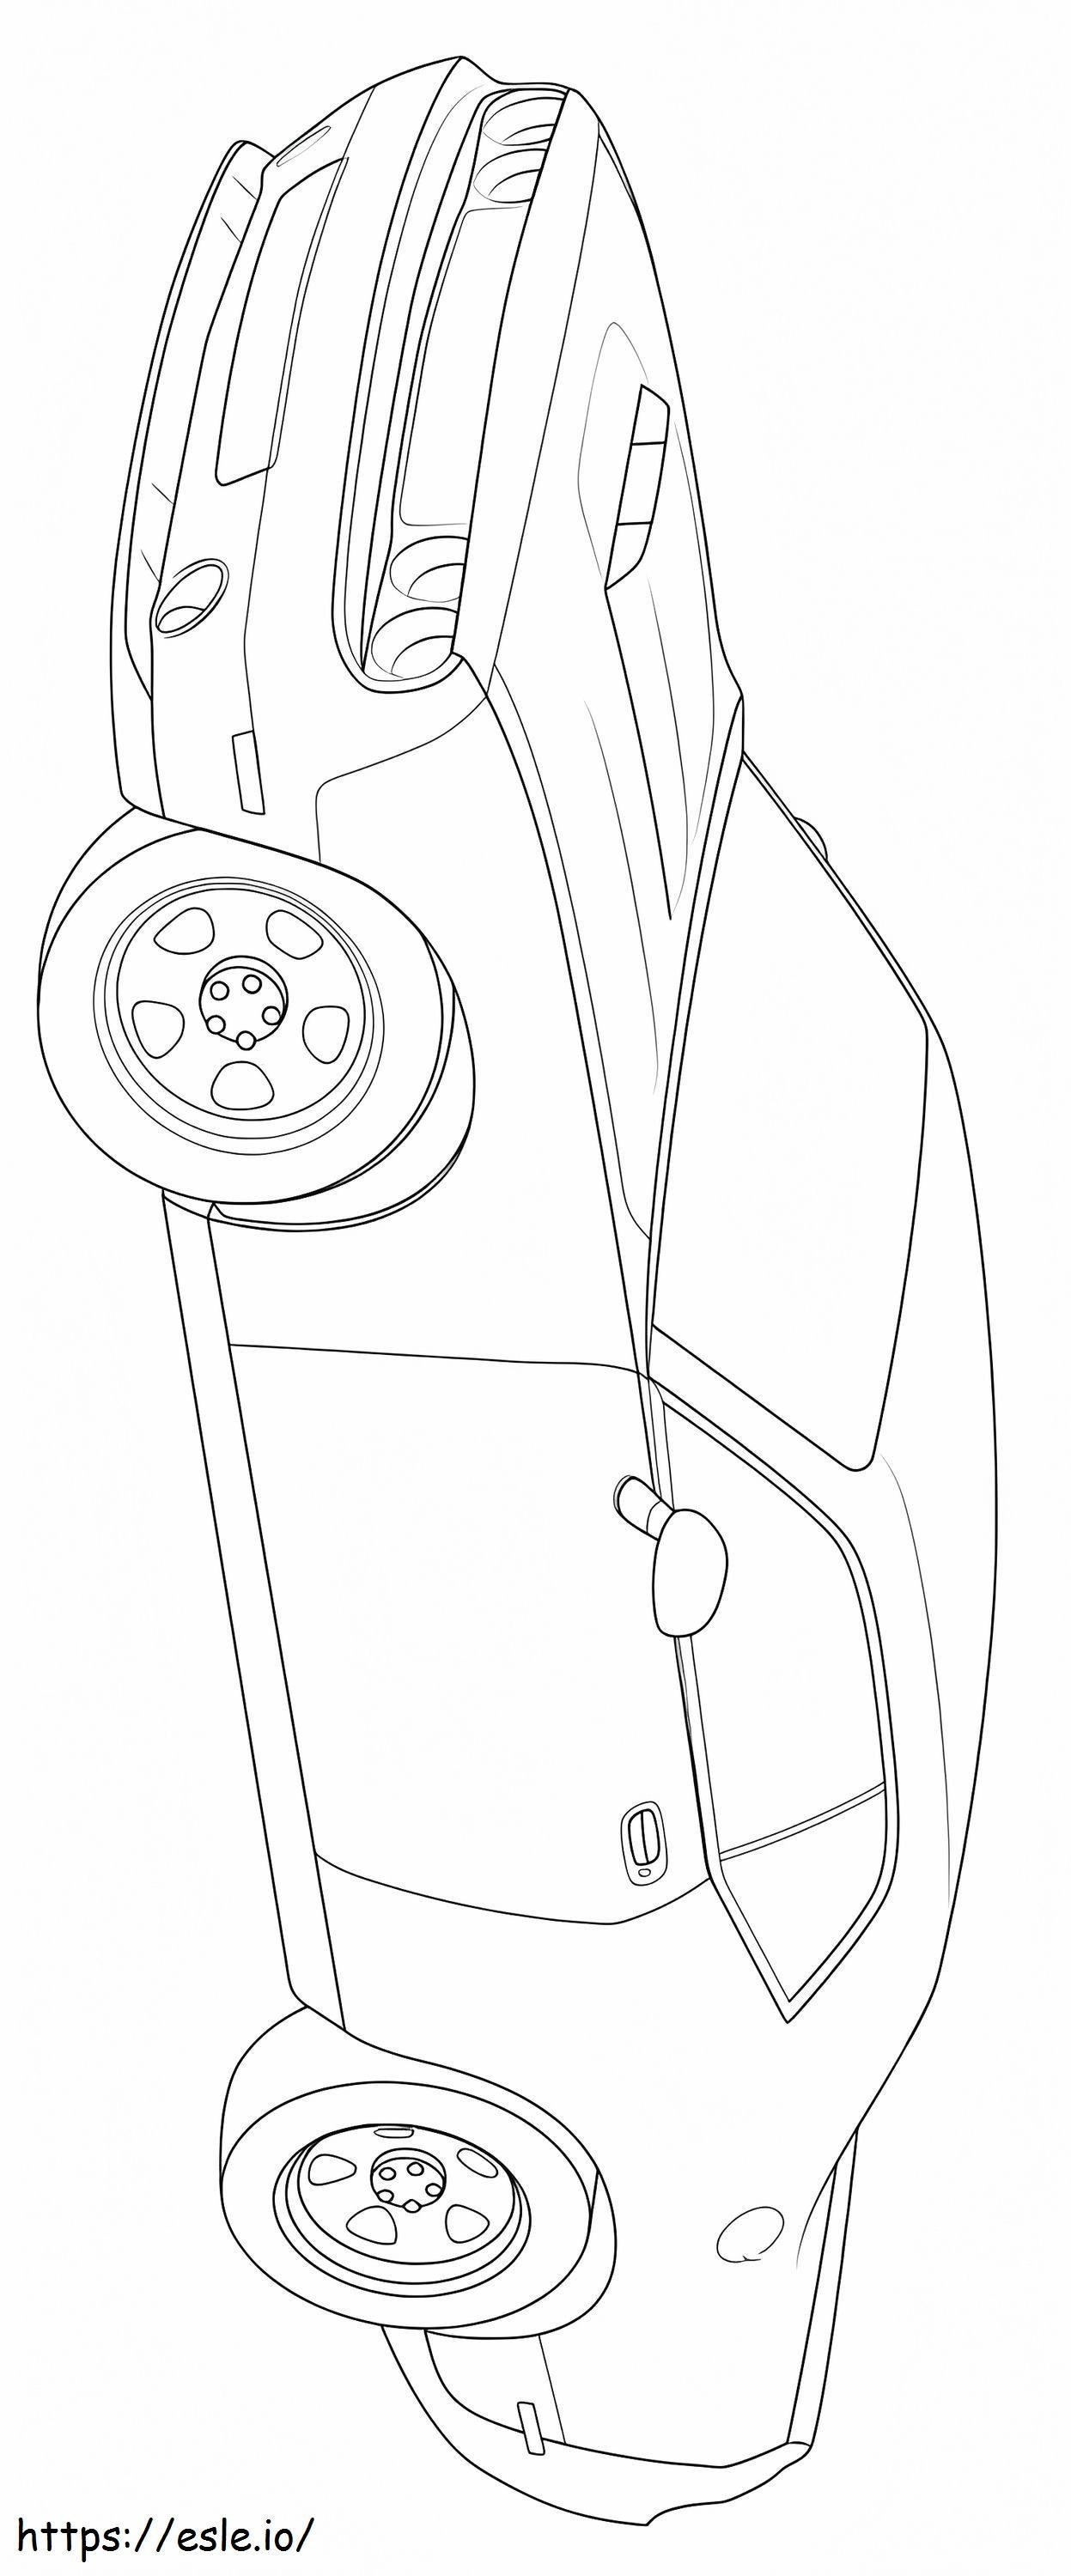 1560764285 Dodge Challenger A4 coloring page